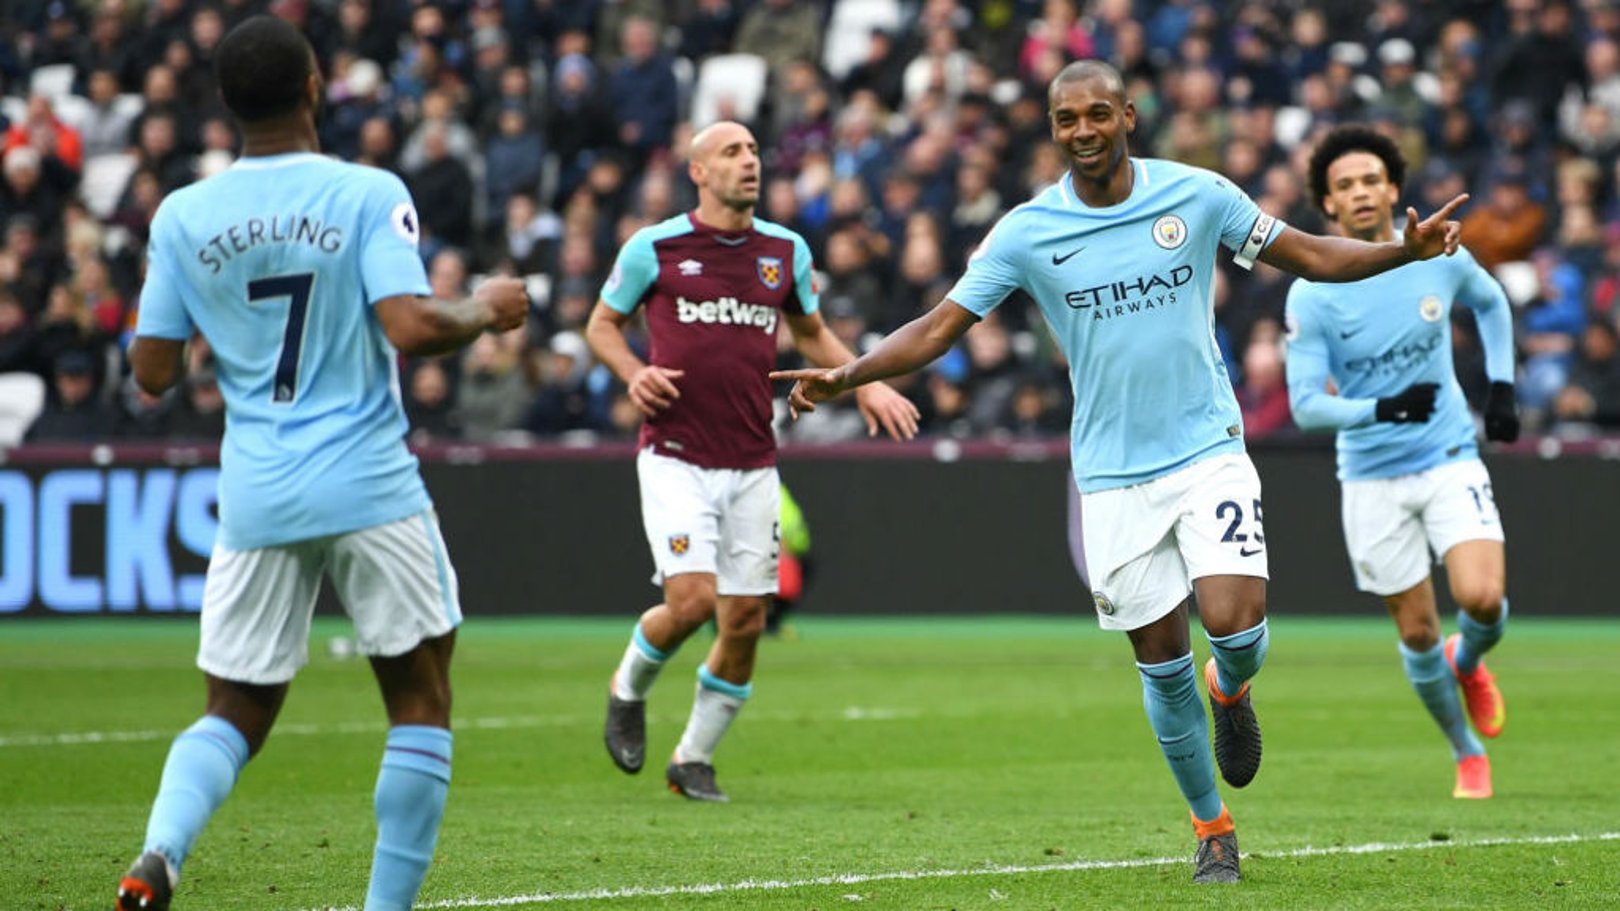 JUST CAPITAL: City ran out convincing 4-1 winners on our last appearance at the London Stadium in April this year